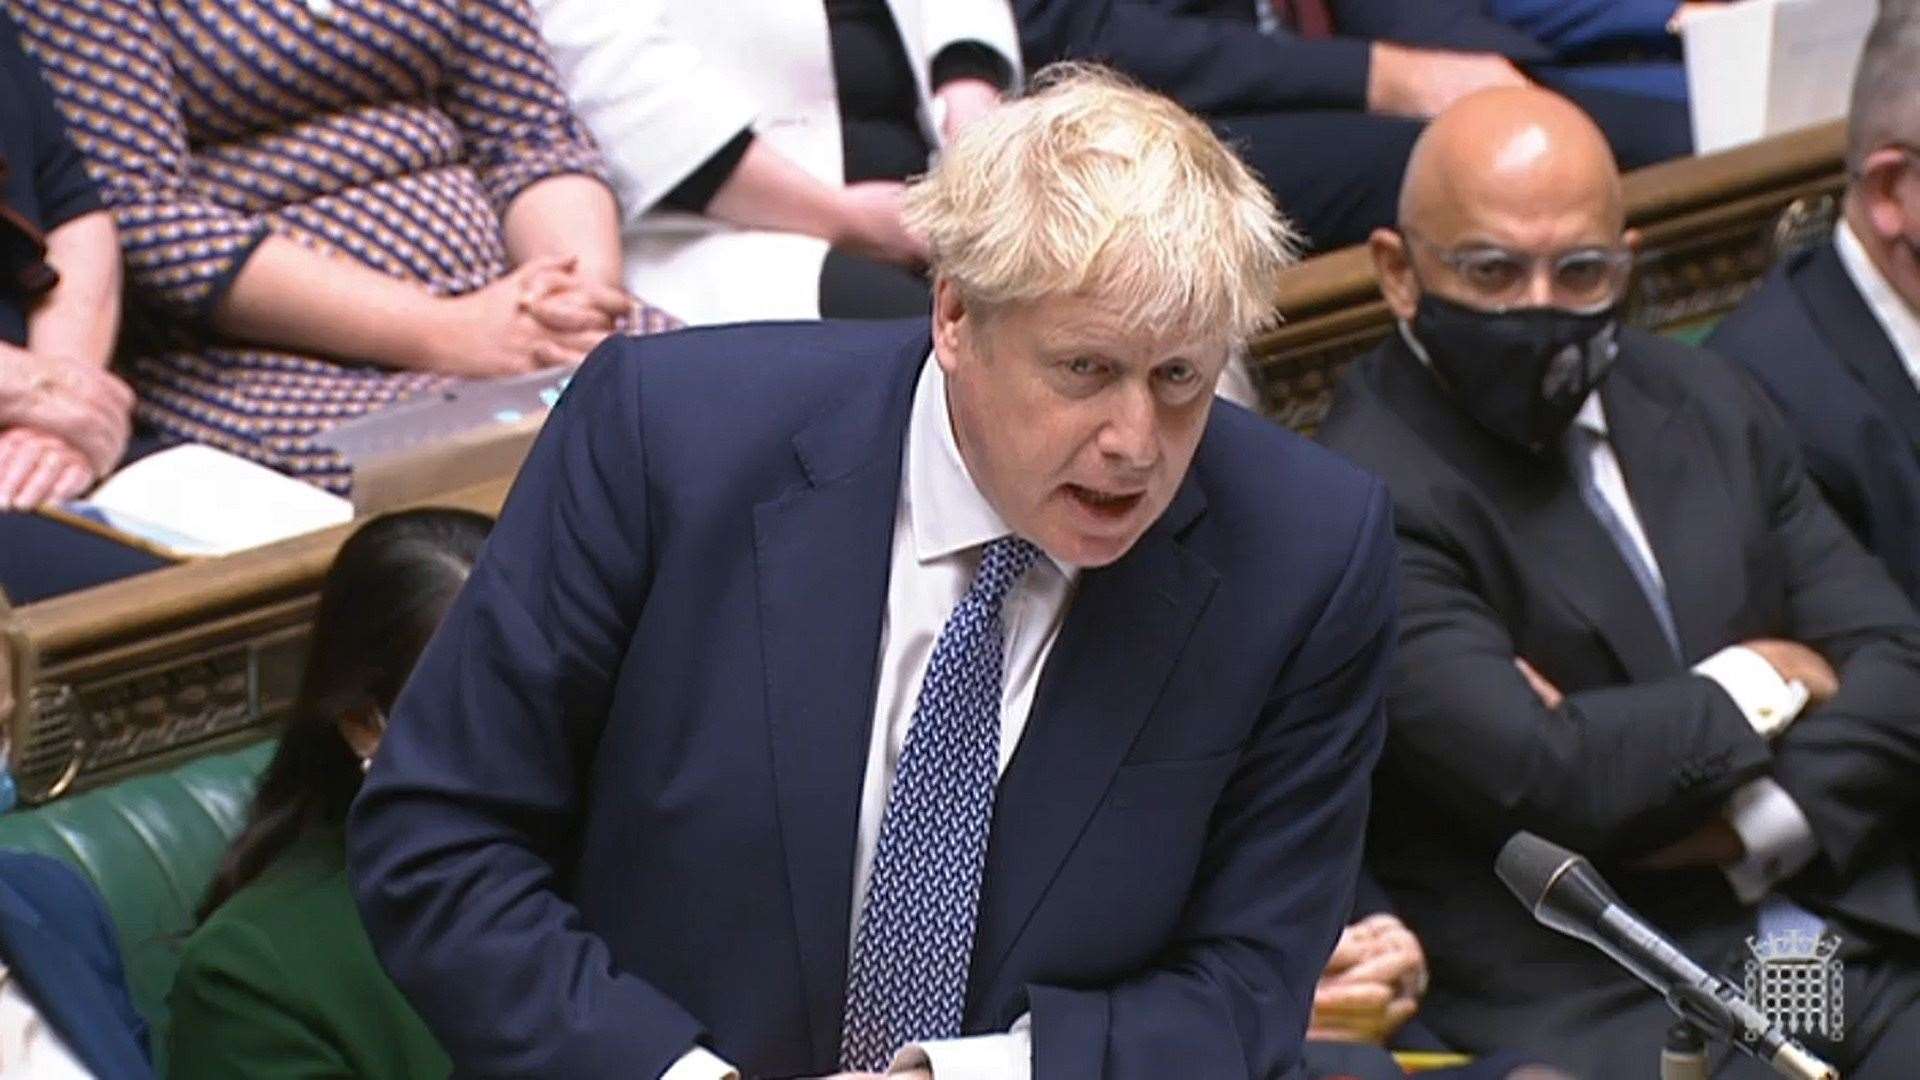 Prime Minister Boris Johnson has faced calls to quit since admitting attending a drinks event in No 10 during the first coronavirus lockdown (House of Commons/PA)